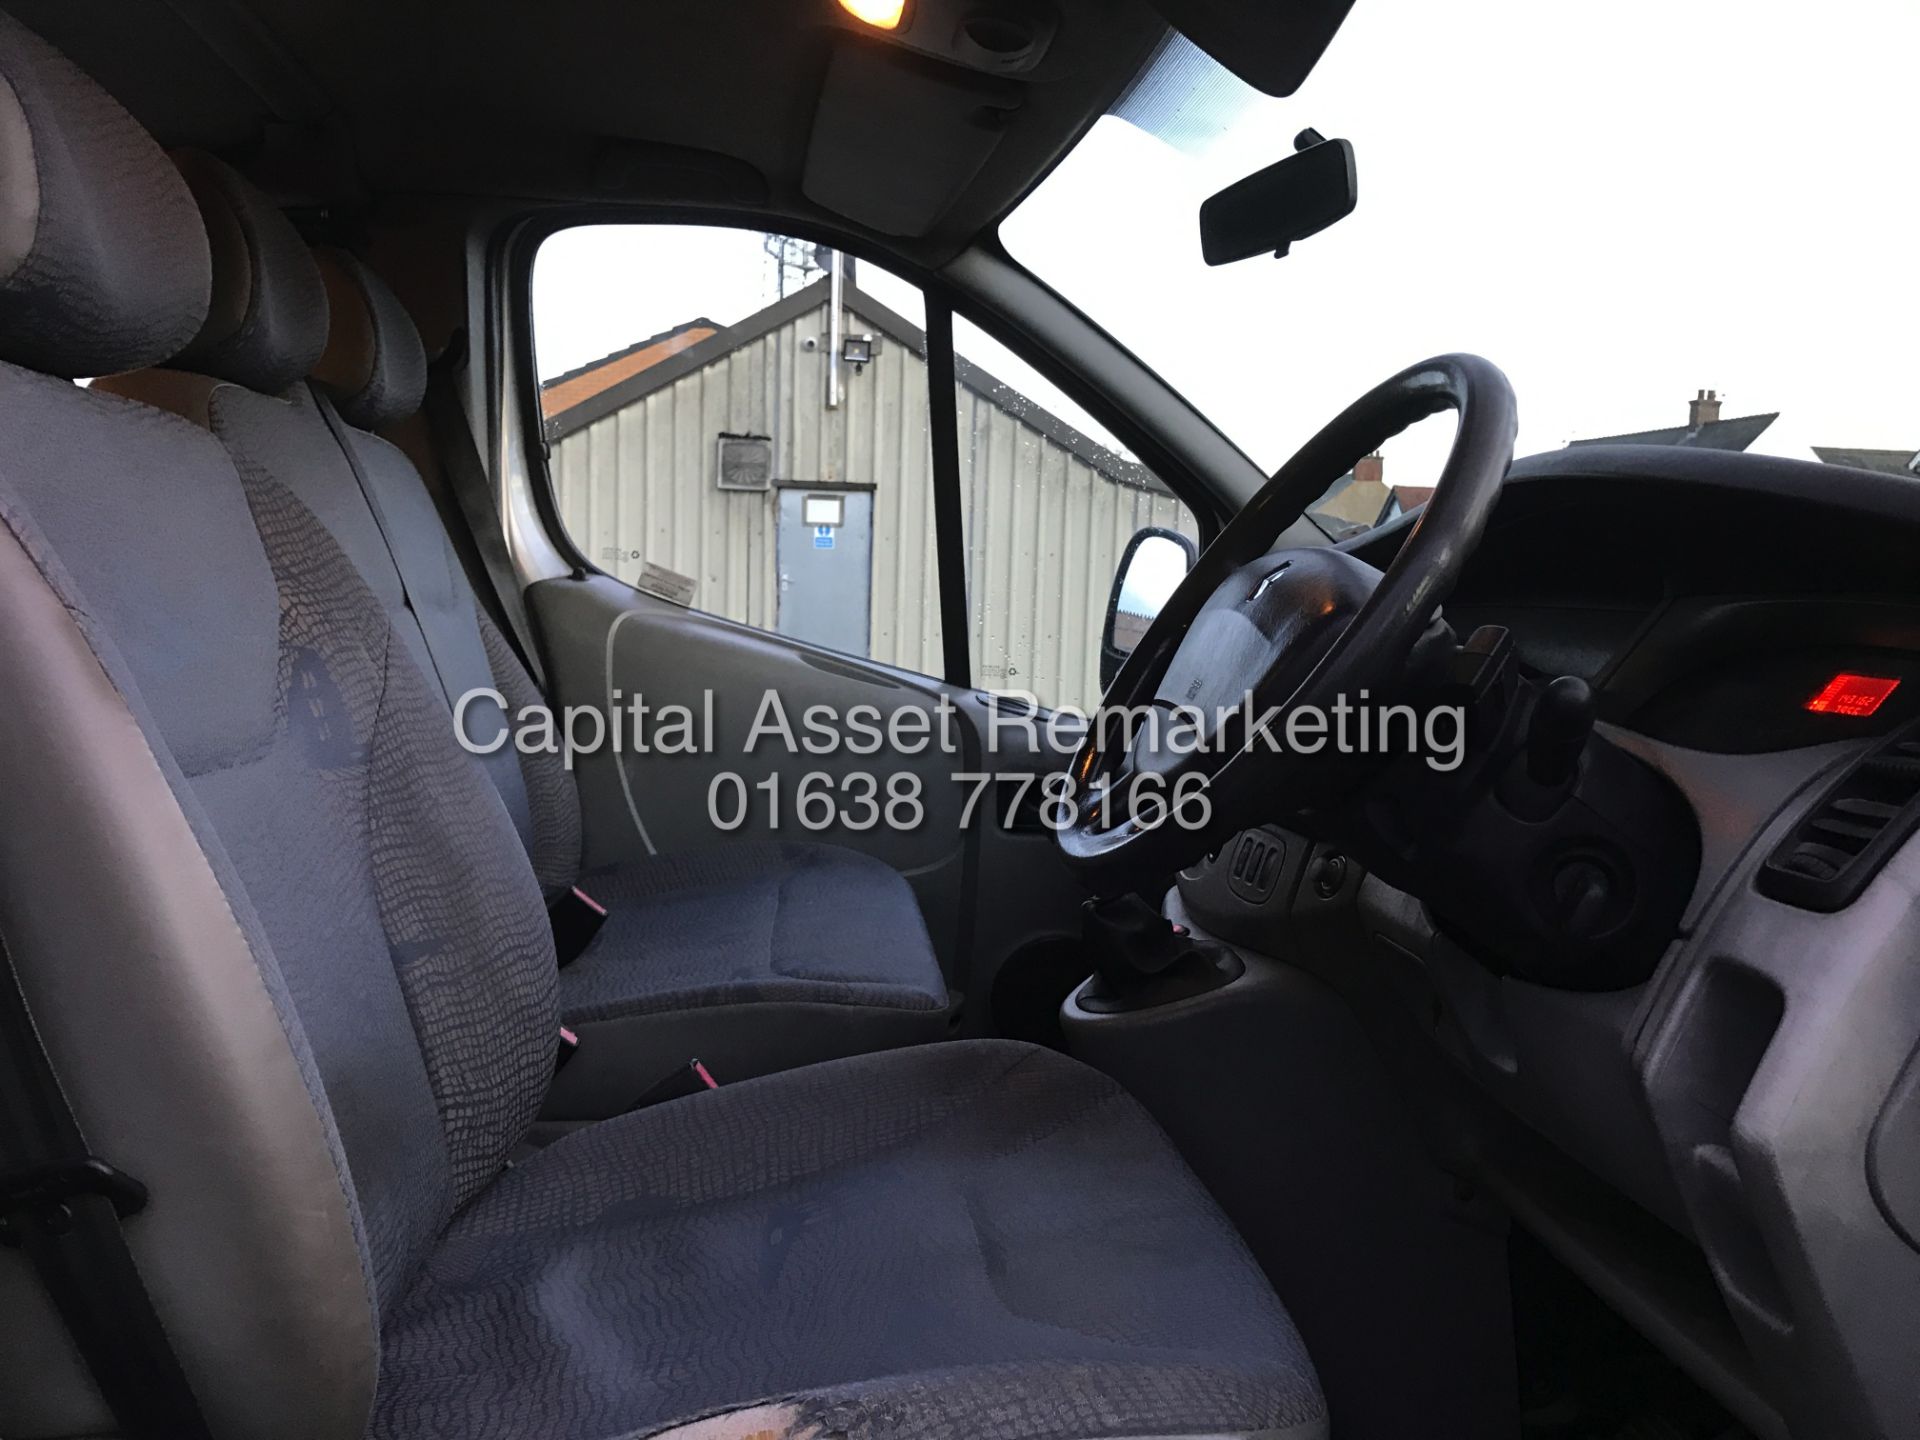 On Sale RENAULT TRAFIC 1.9DCI LONG WHEEL BASE DUELINER 6 SEATER - 05 REG - SILVER - AIR CON - WOW!!! - Image 6 of 19